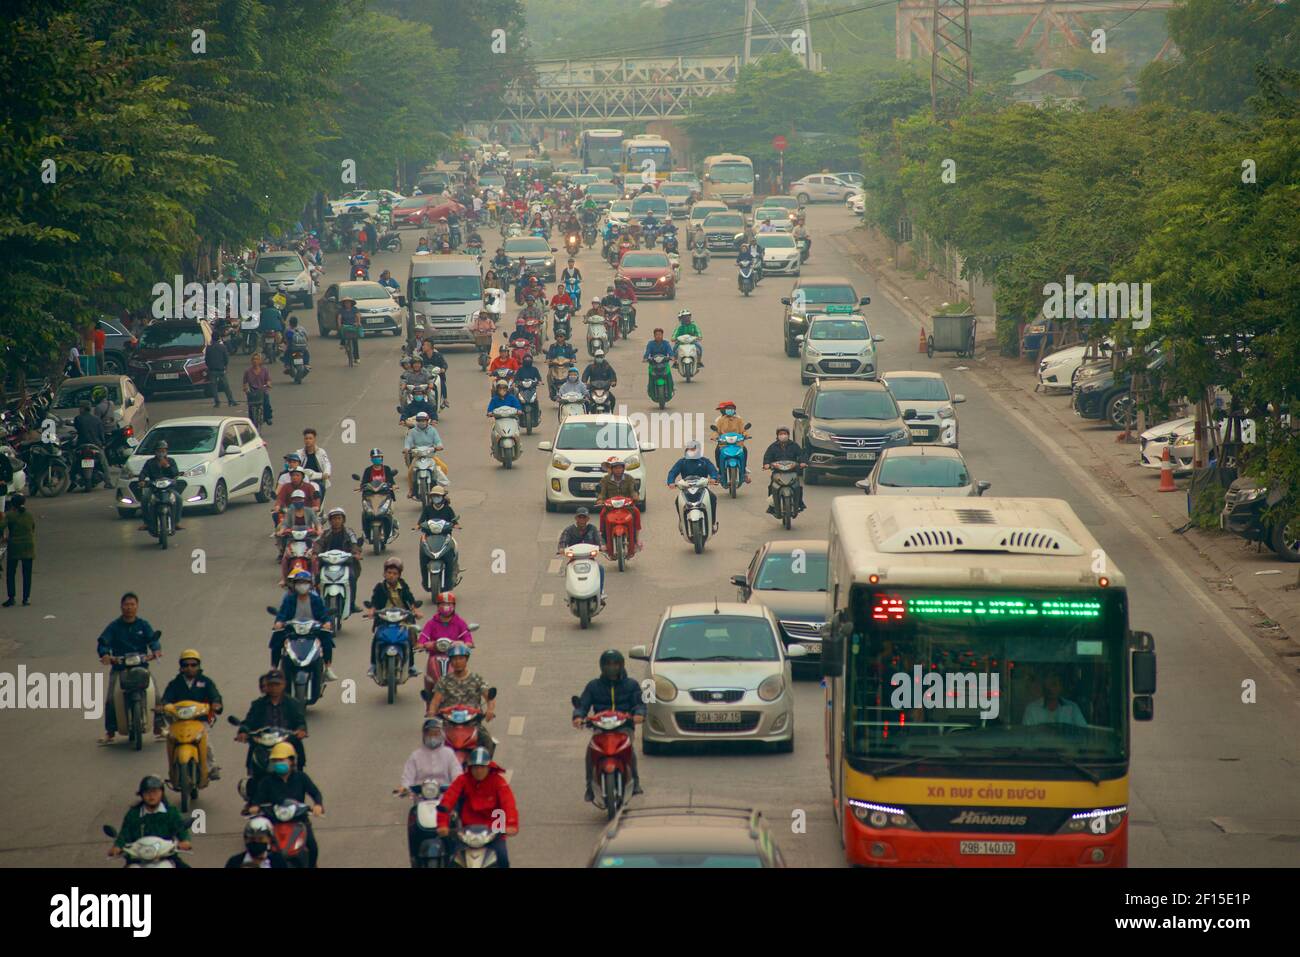 Urban traffic, Hanoi, Vietnam. Busy street with motorcycles, cars and buses. Stock Photo